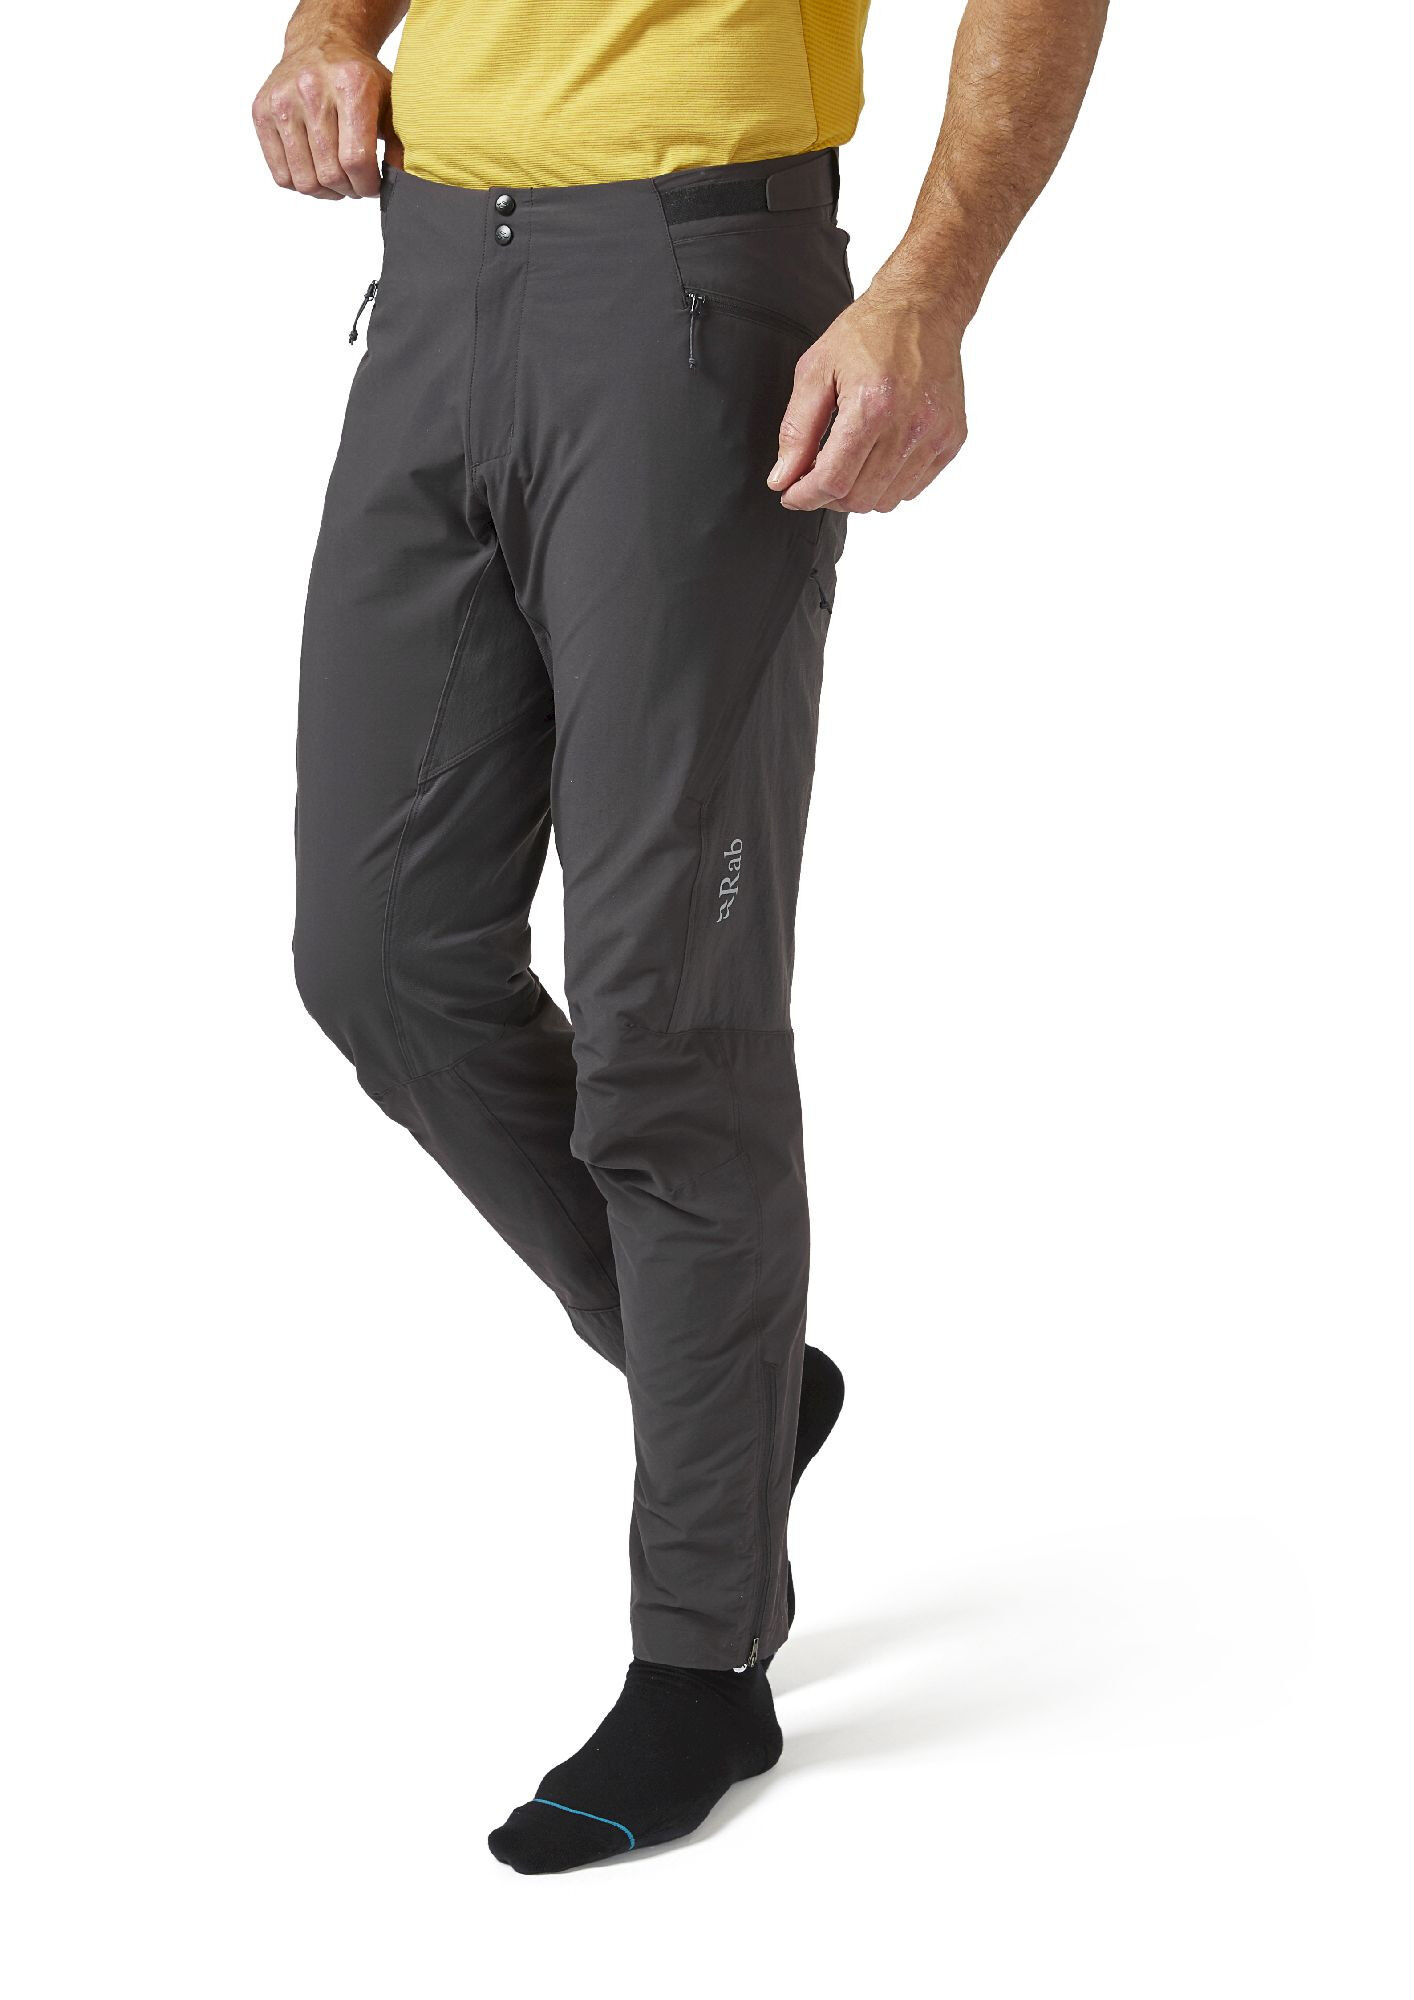 Men's Cycling Trousers 丨 ROAD TO SKY